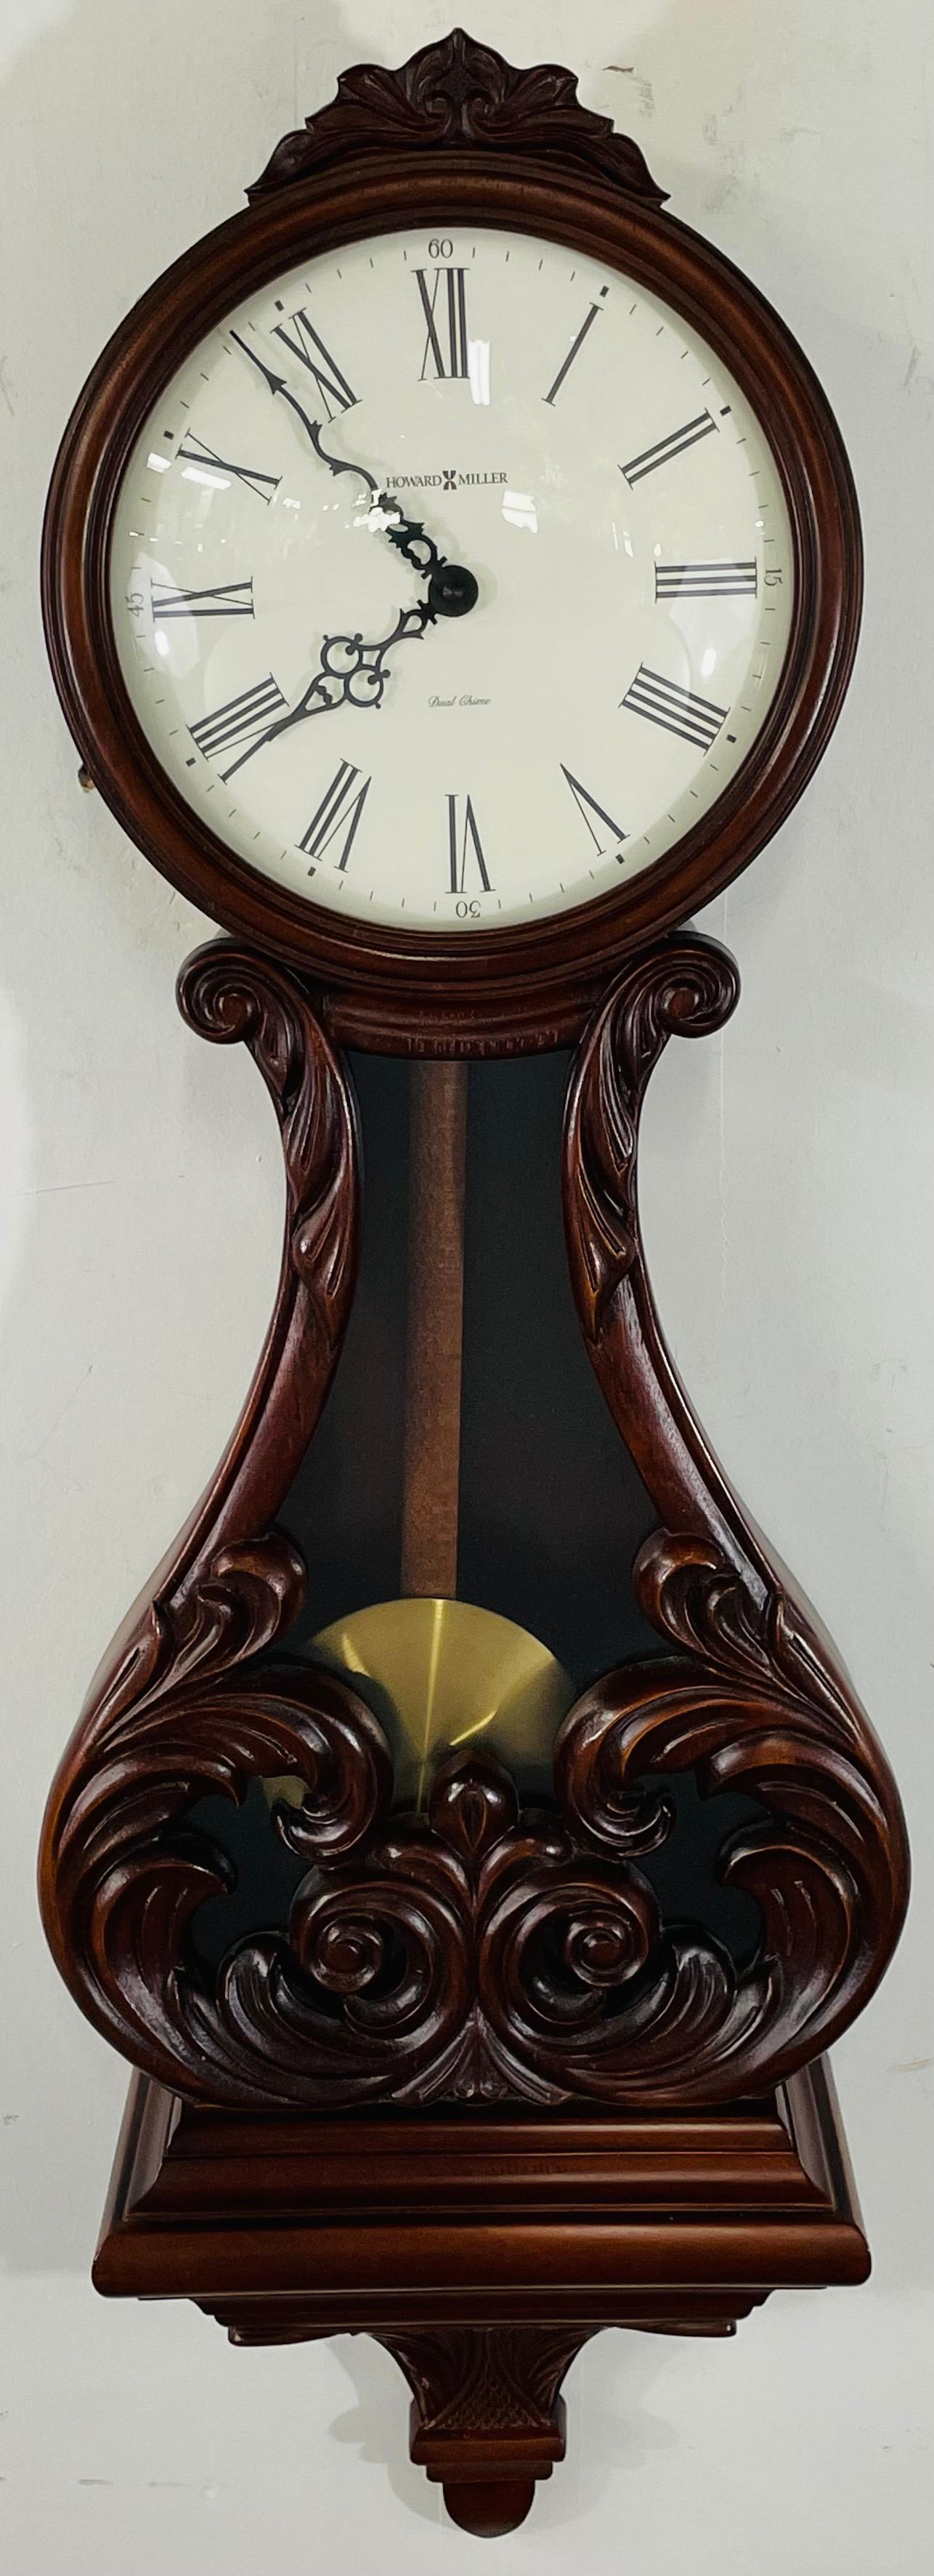 A Classic Howard Miller Valencia wall clock , model 620-236. The vintage clock features great Mahogany wood carving details . The clock is Quartz with Dual chime movement and has its original label with serial and model number. 

Dimensions: 35